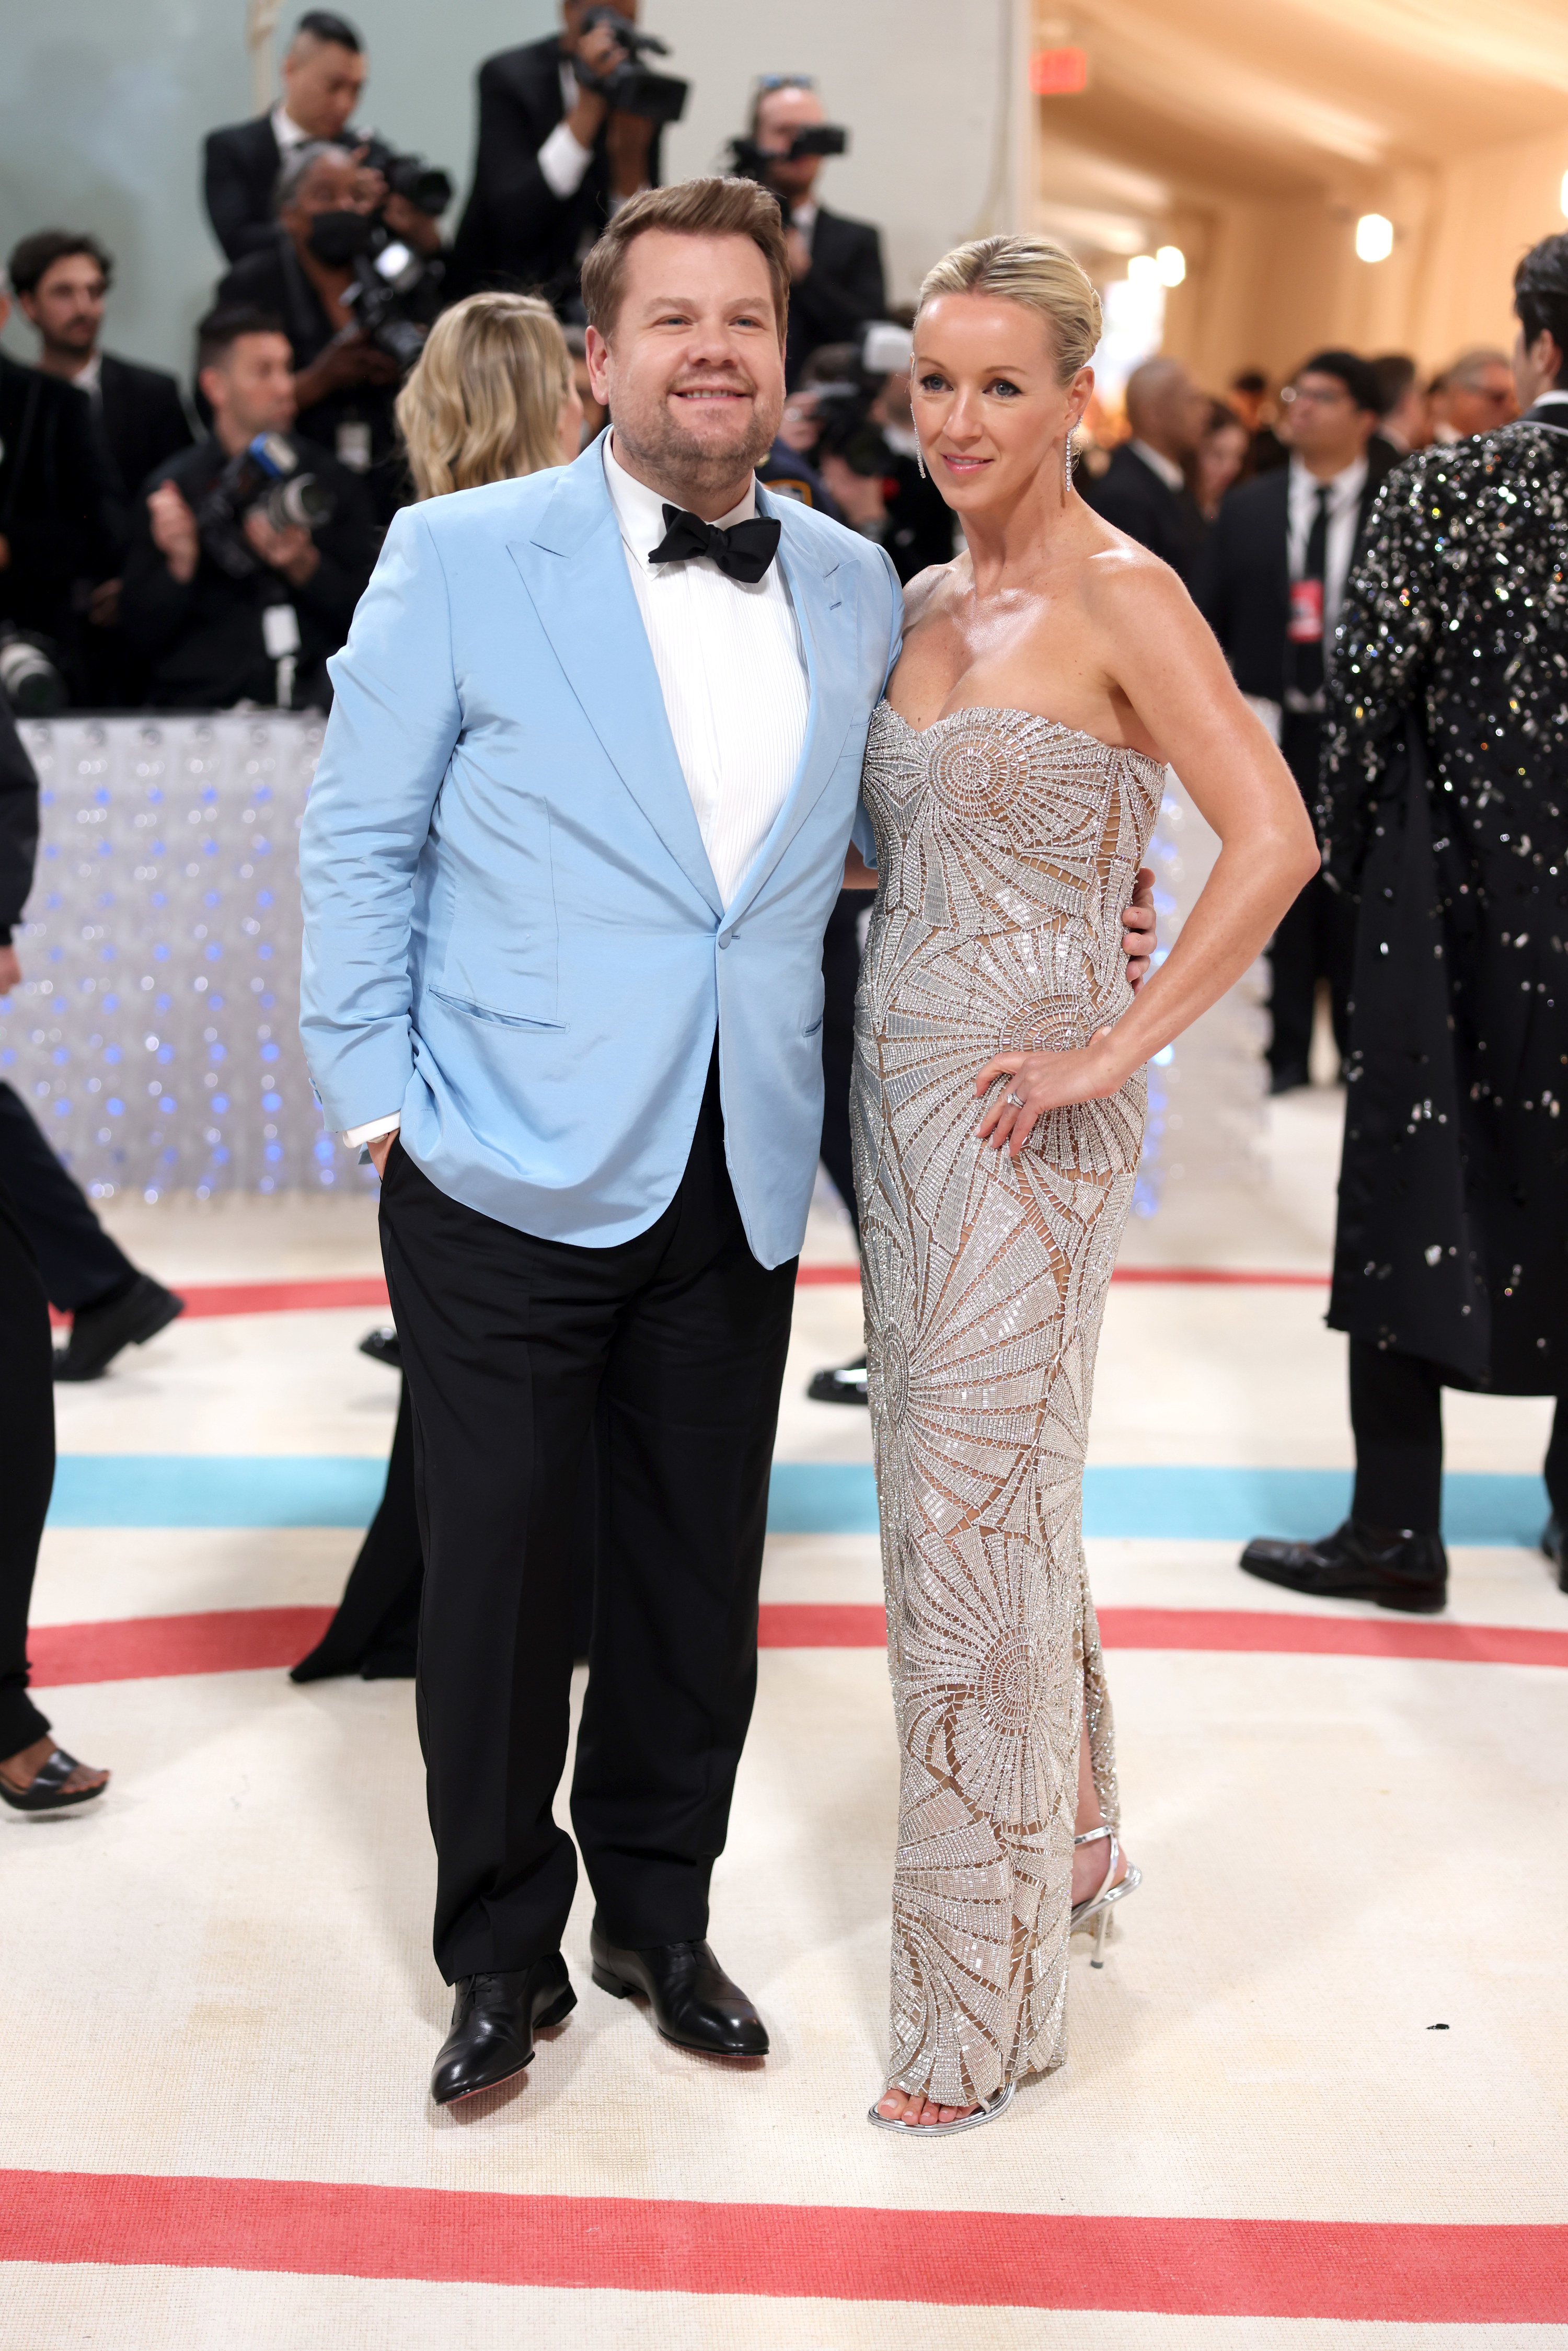 James Corden and his wife at the Met Gala: